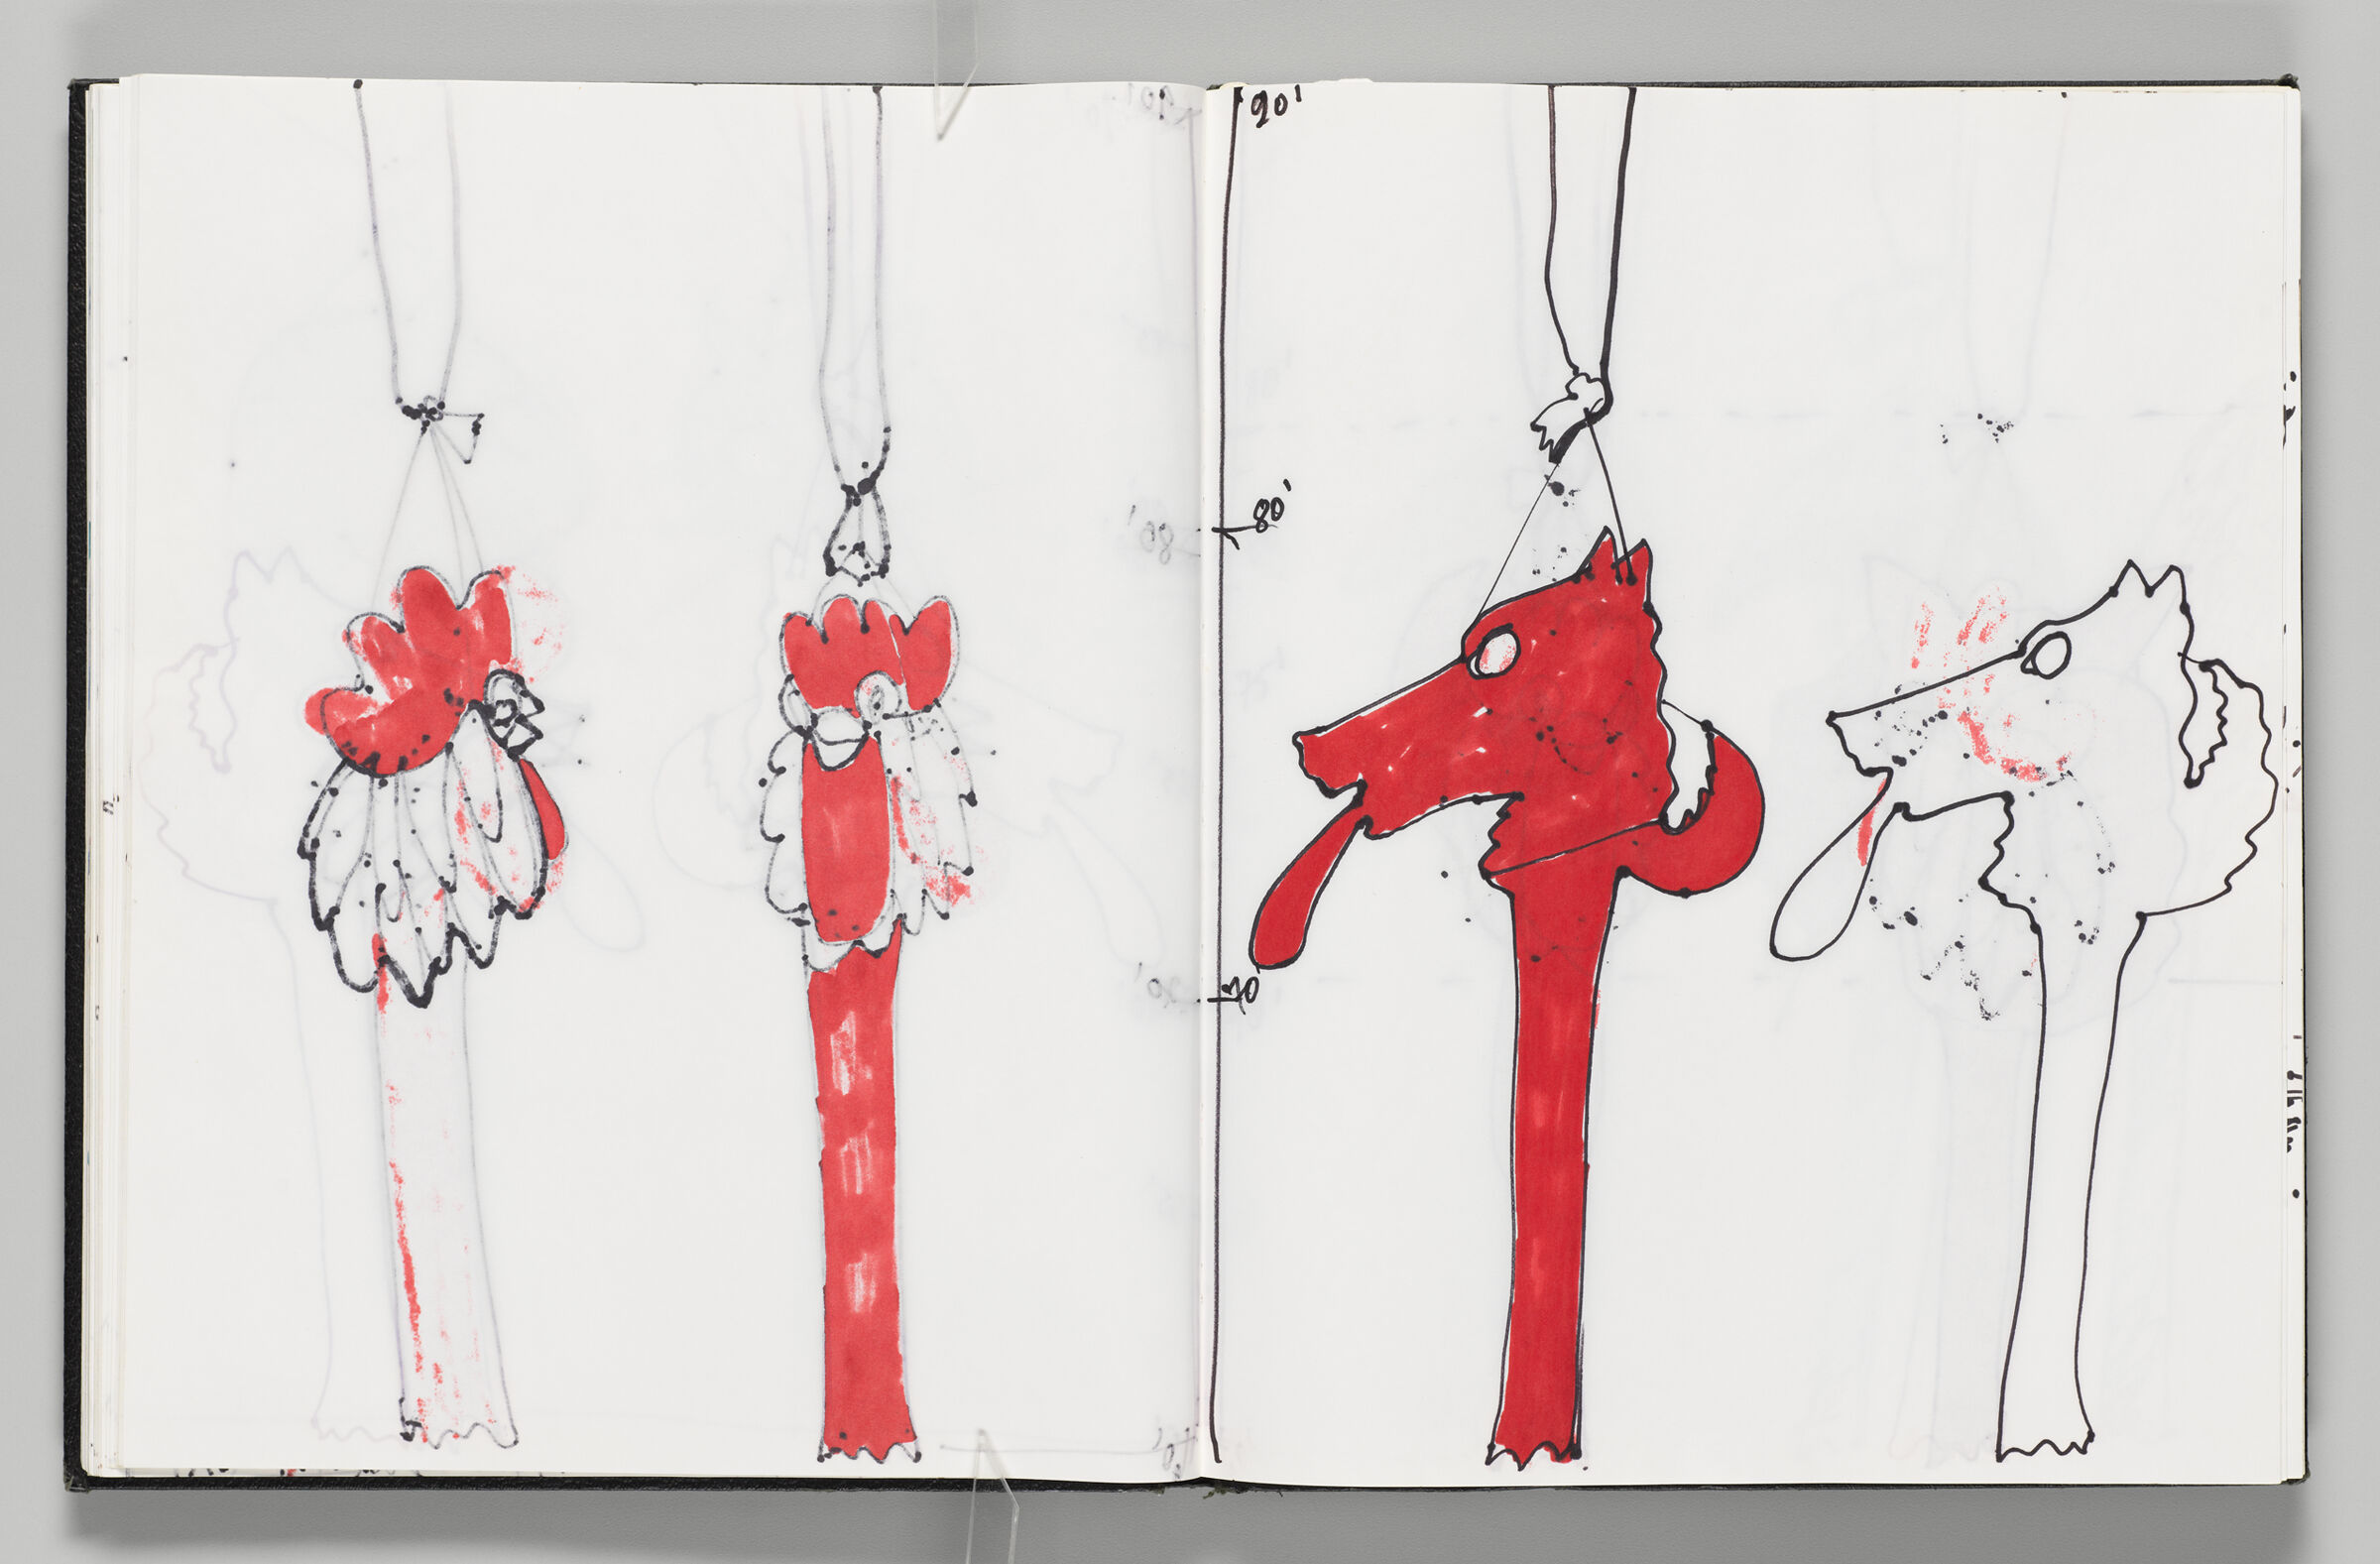 Untitled (Bleed-Through Of Previous Page, Left Page); Untitled (Scale Of Dog Inflatable With Faint Color Transfer, Right Page)